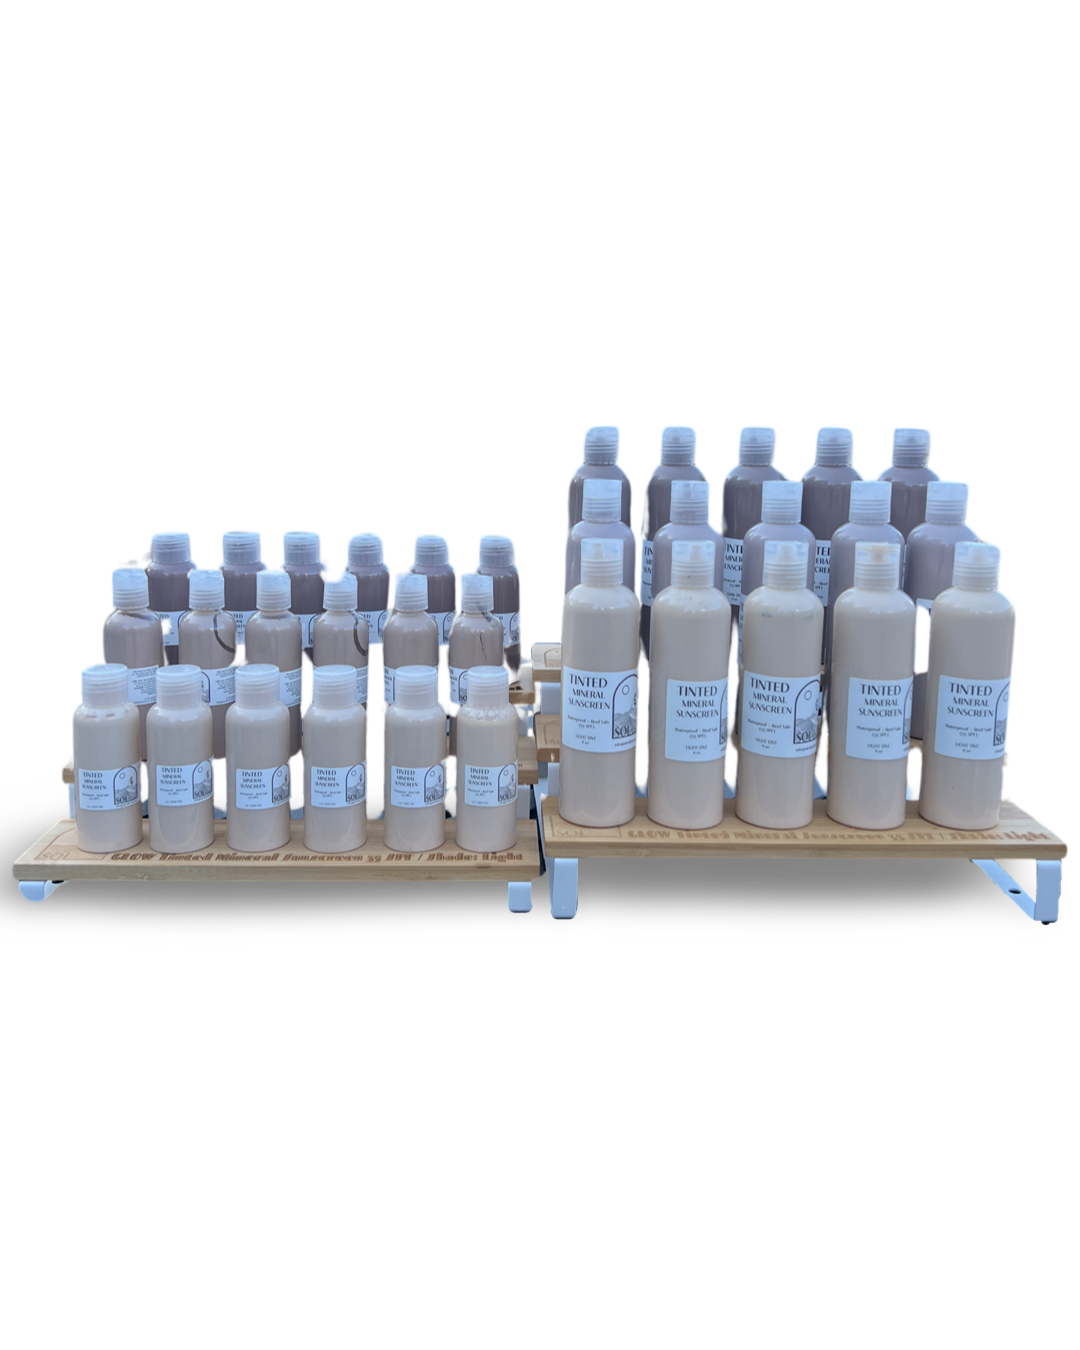 Sol Organic Skincare TINTED Mineral Sunscreens Wholesale Display Order & Re-Orders